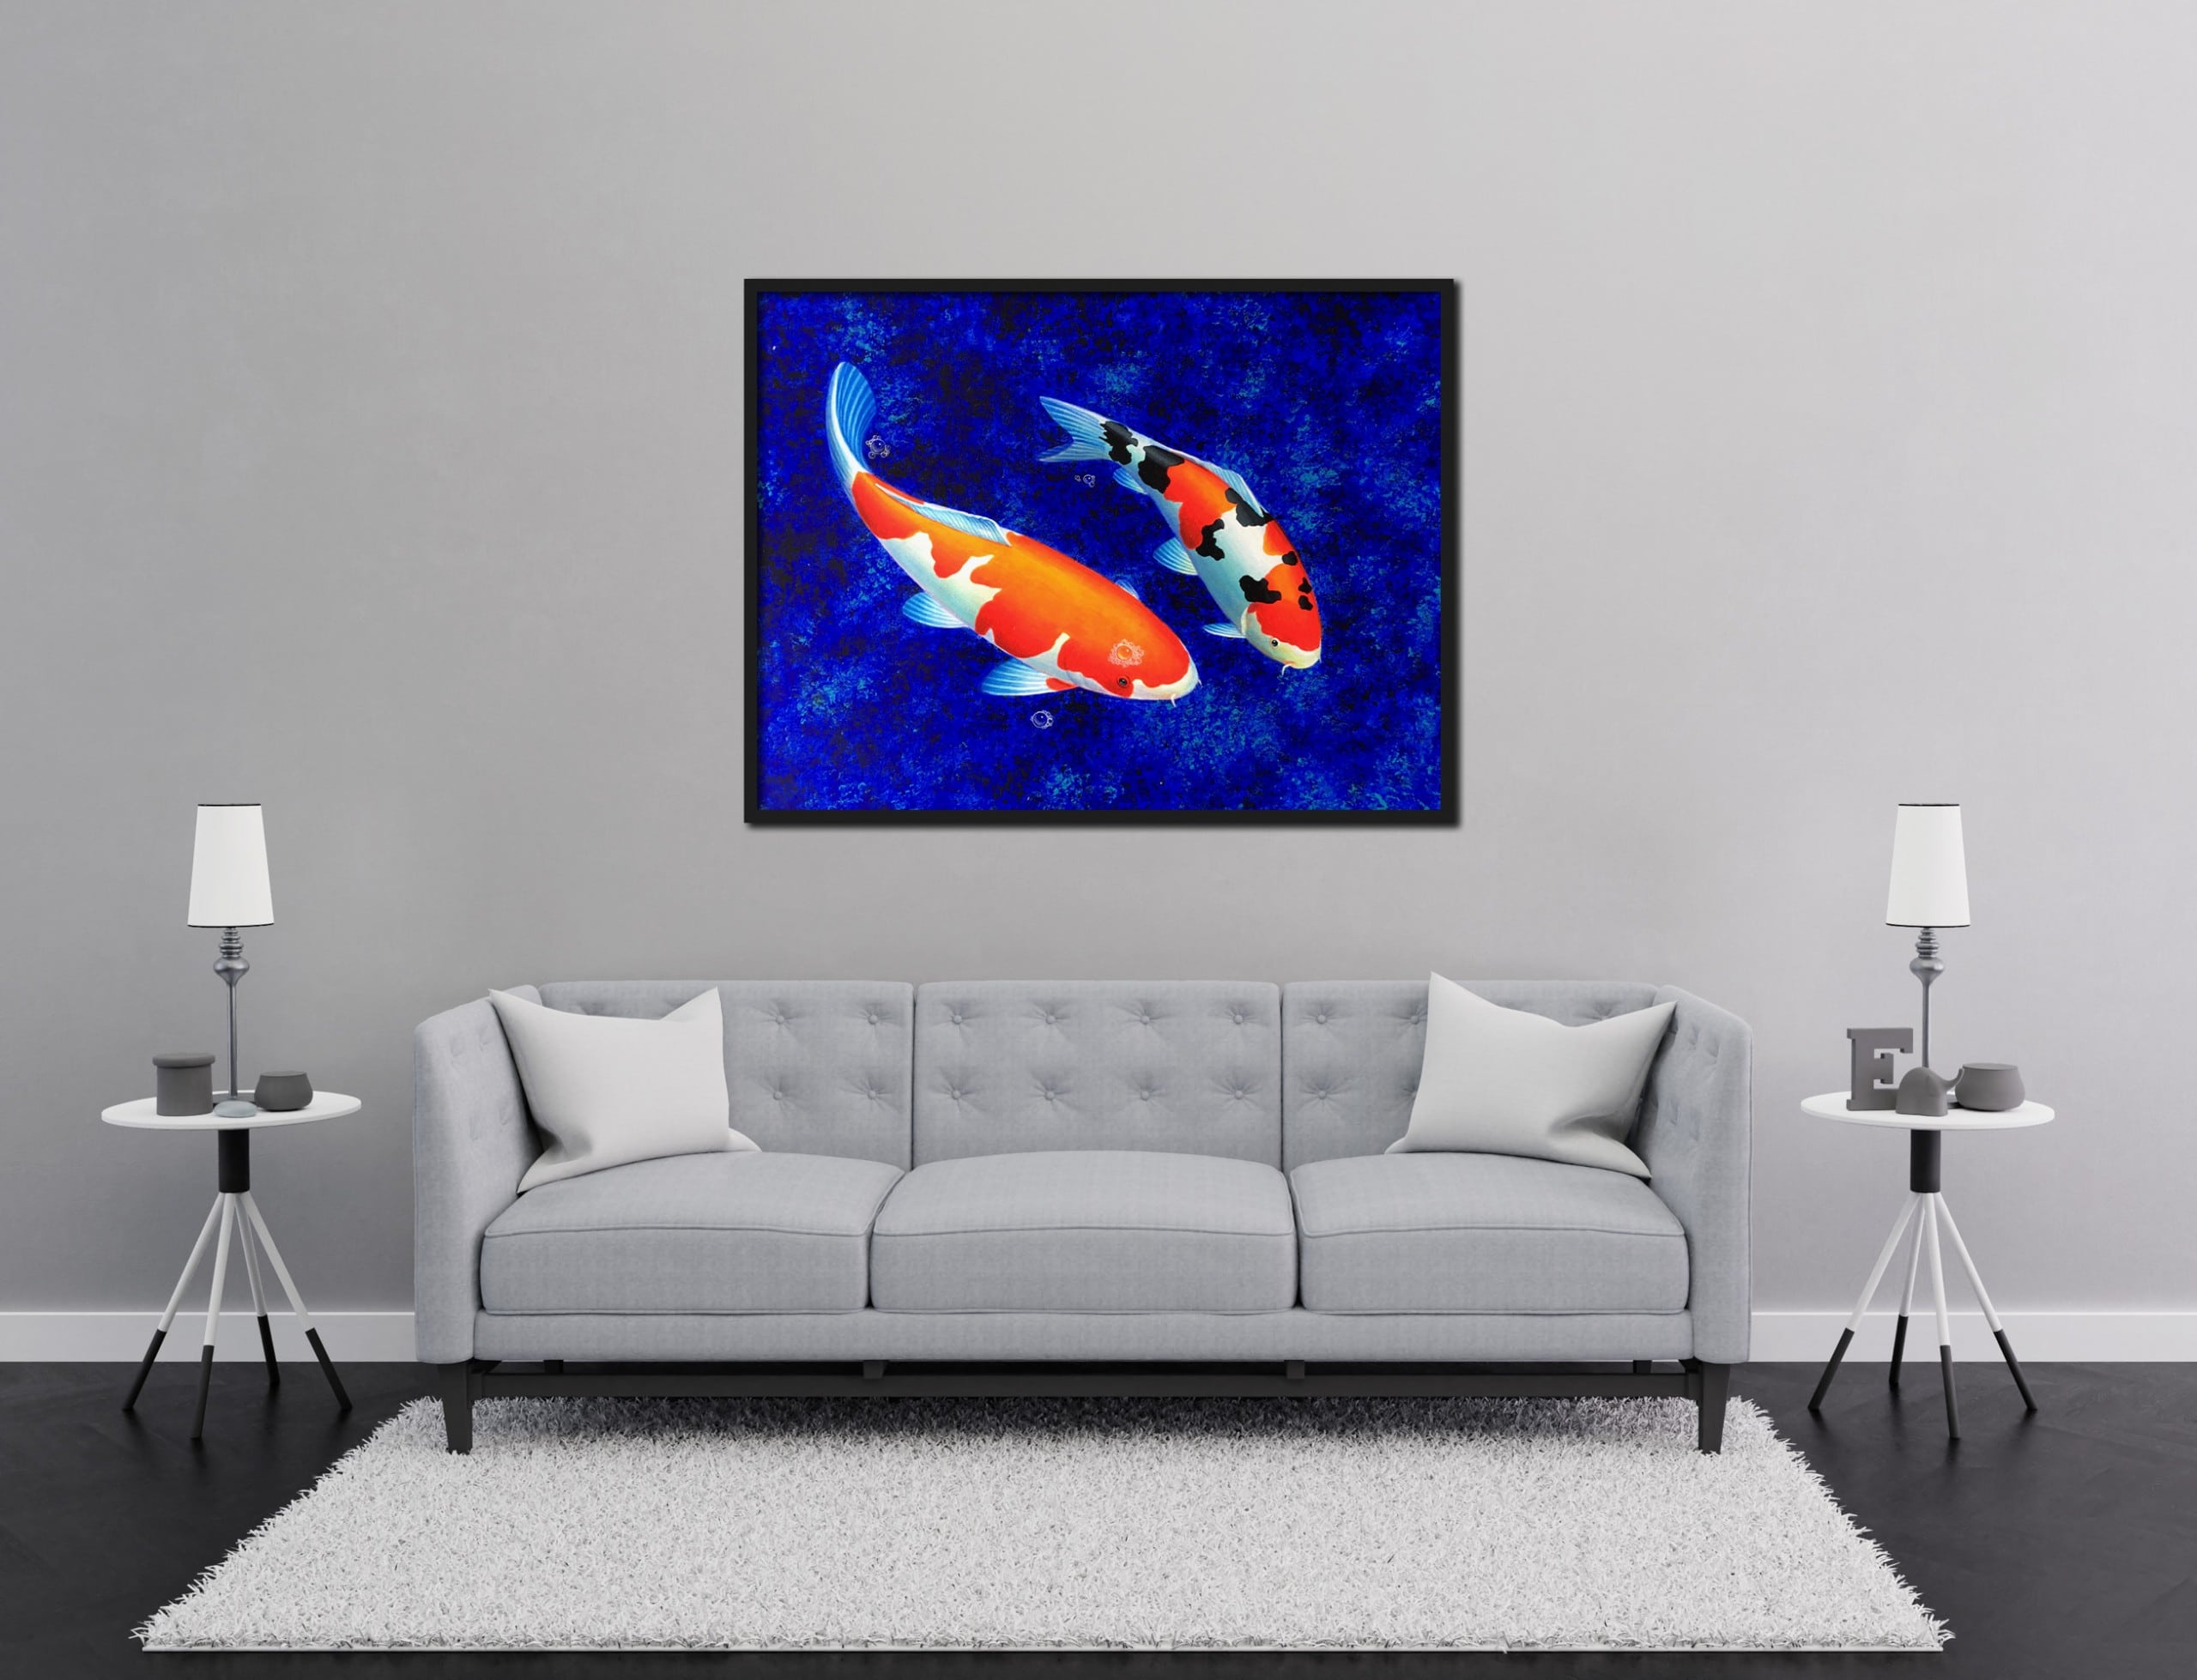 Two Koi Fish Painting - 100% Hand-Painted oil on Canvas